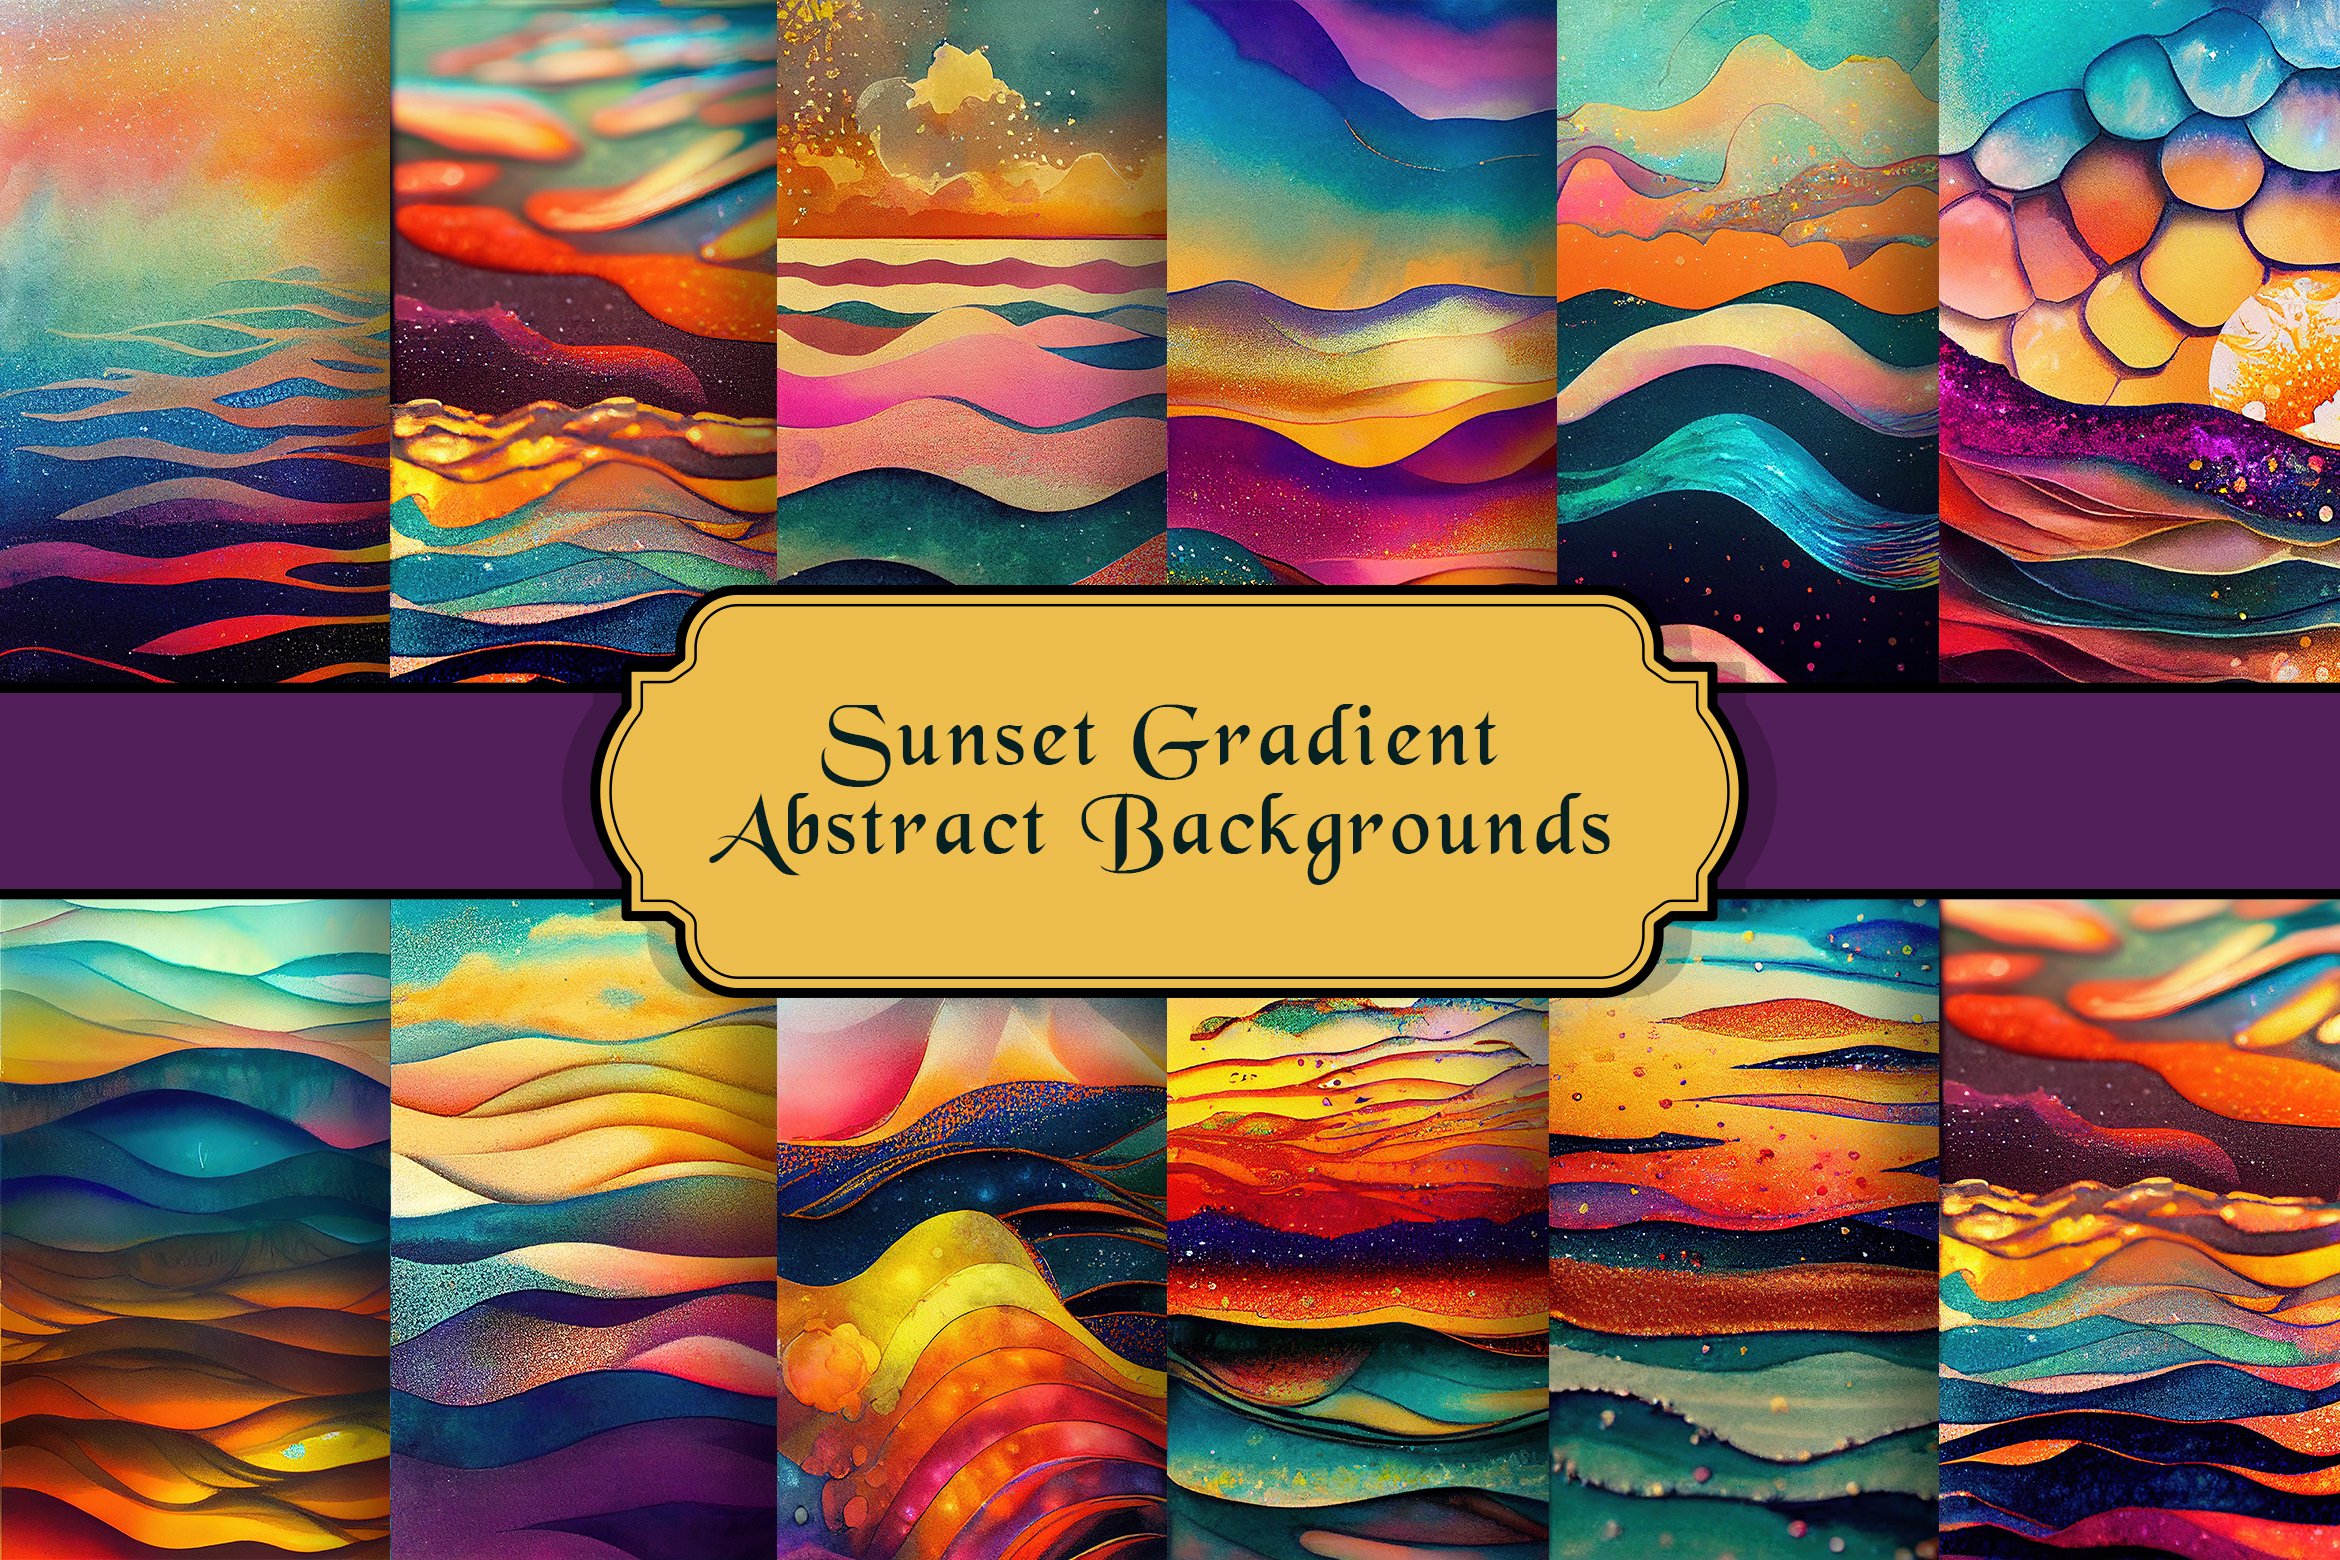 Sunset Gradient Abstract Backgrounds cover image.